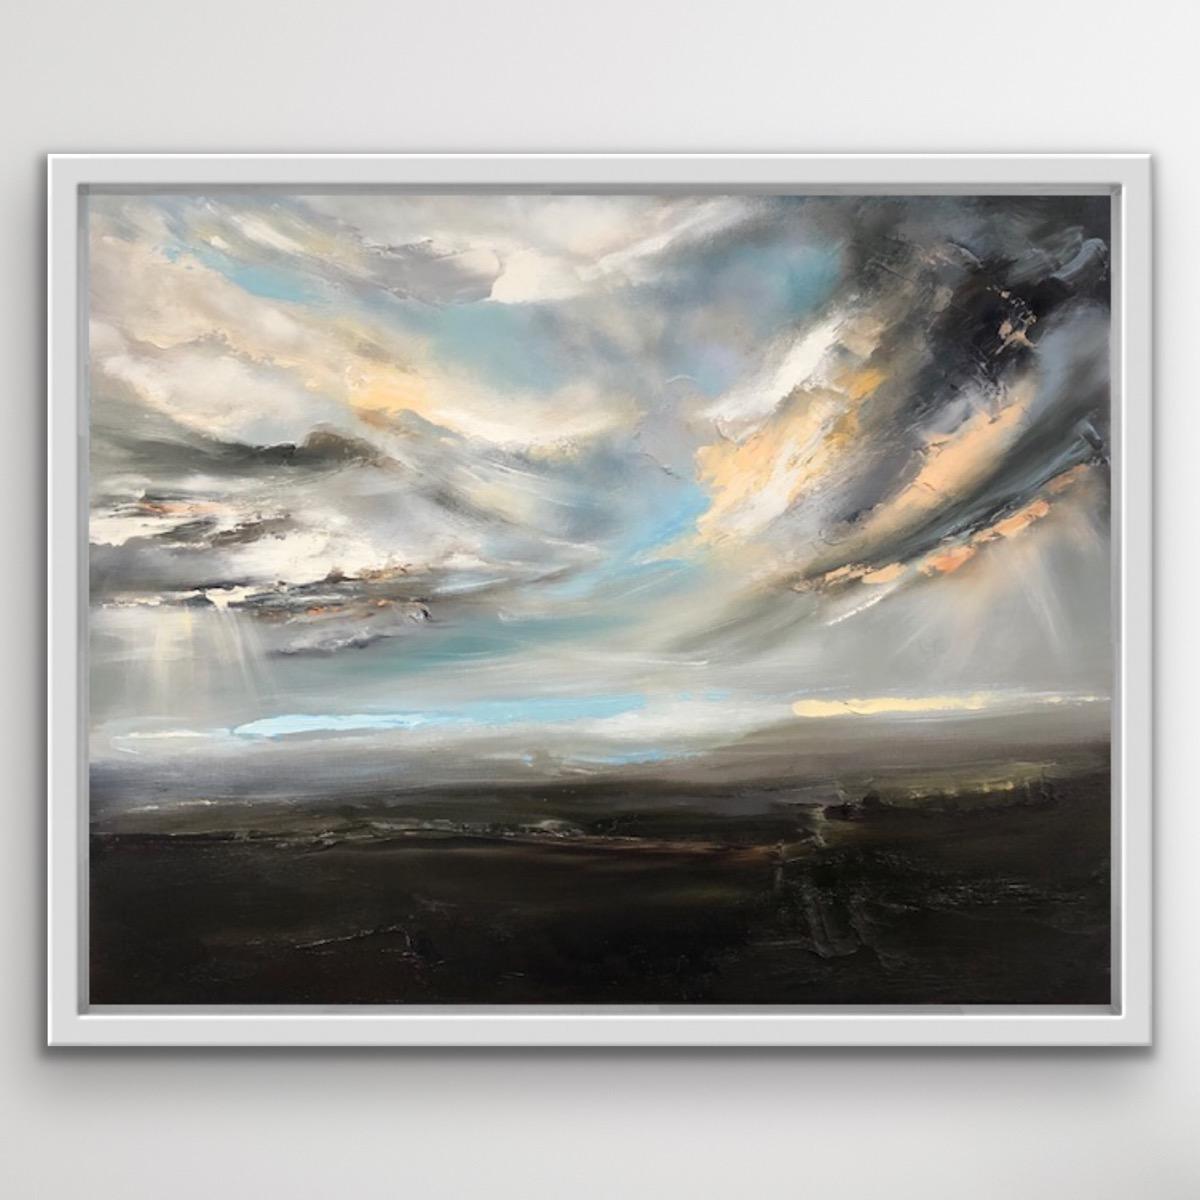 The Light Within is an original landscape by Helen Howells. The Light Within was inspired during lockdown, and through emotional brushstrokes the artist has endeavoured to capture the beauty of her beloved South Wales. Light piercing through the